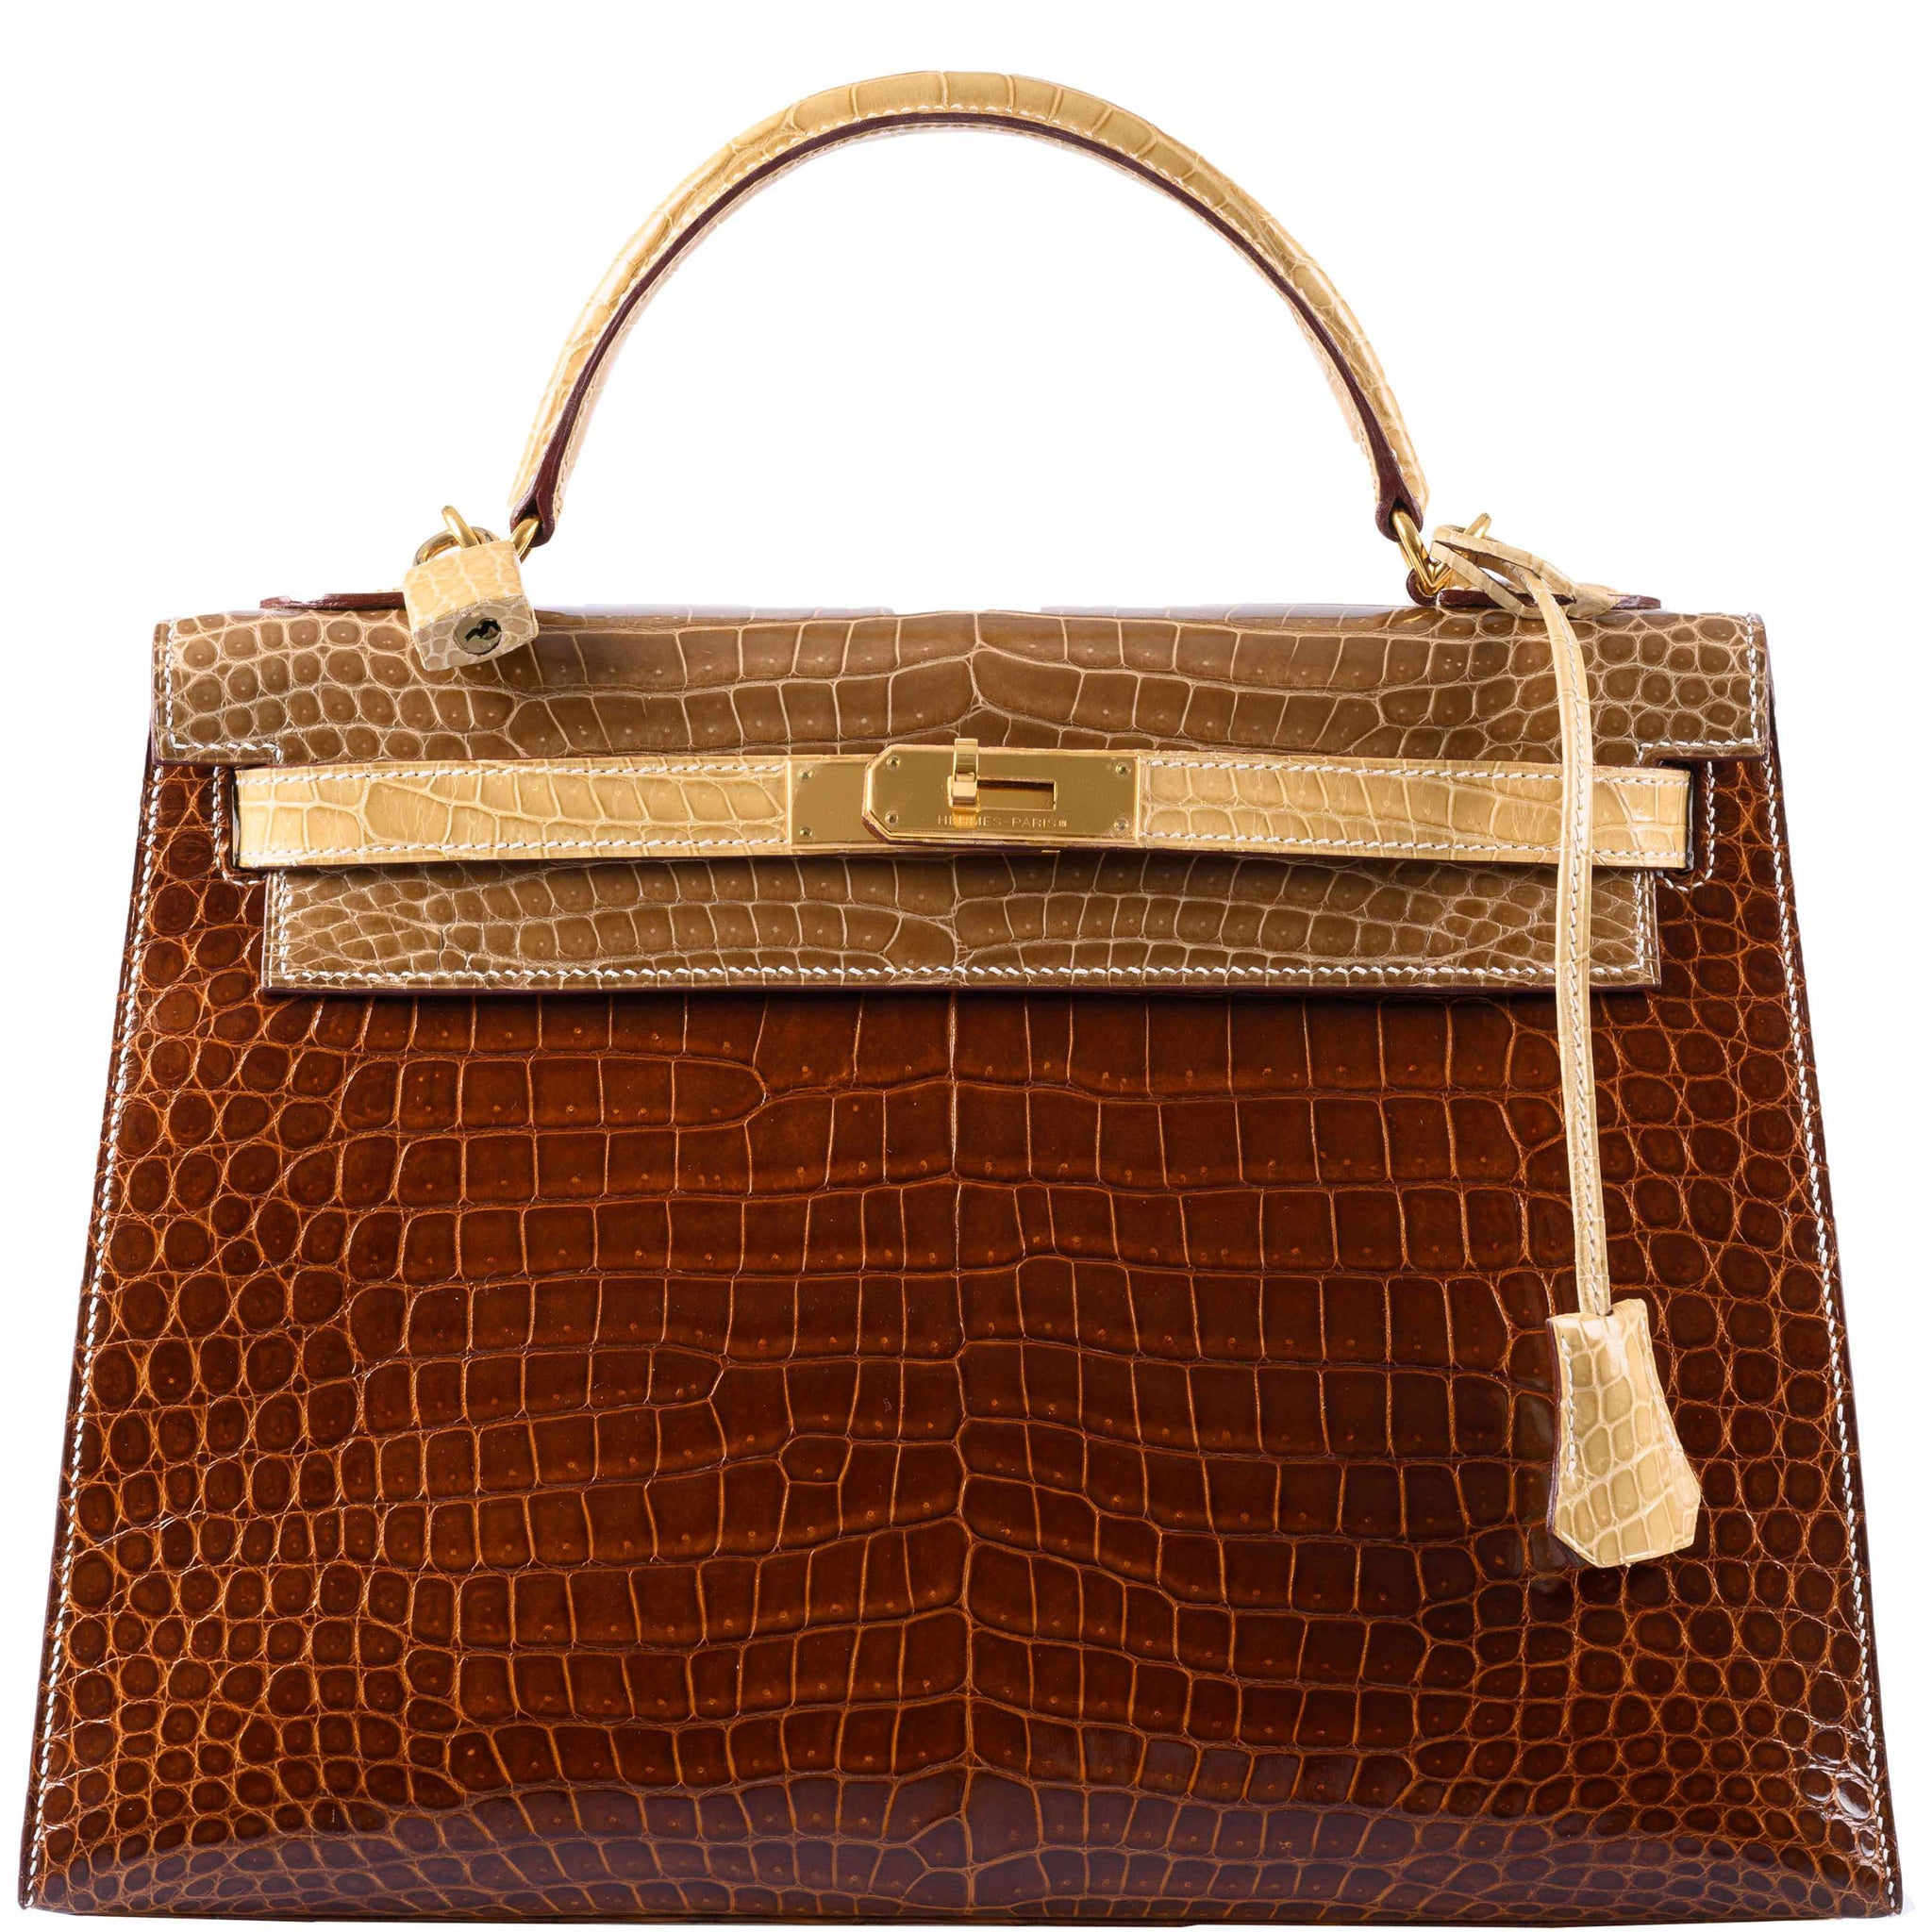 Hermes Kelly 32 in crocodile Porosus Item not available on